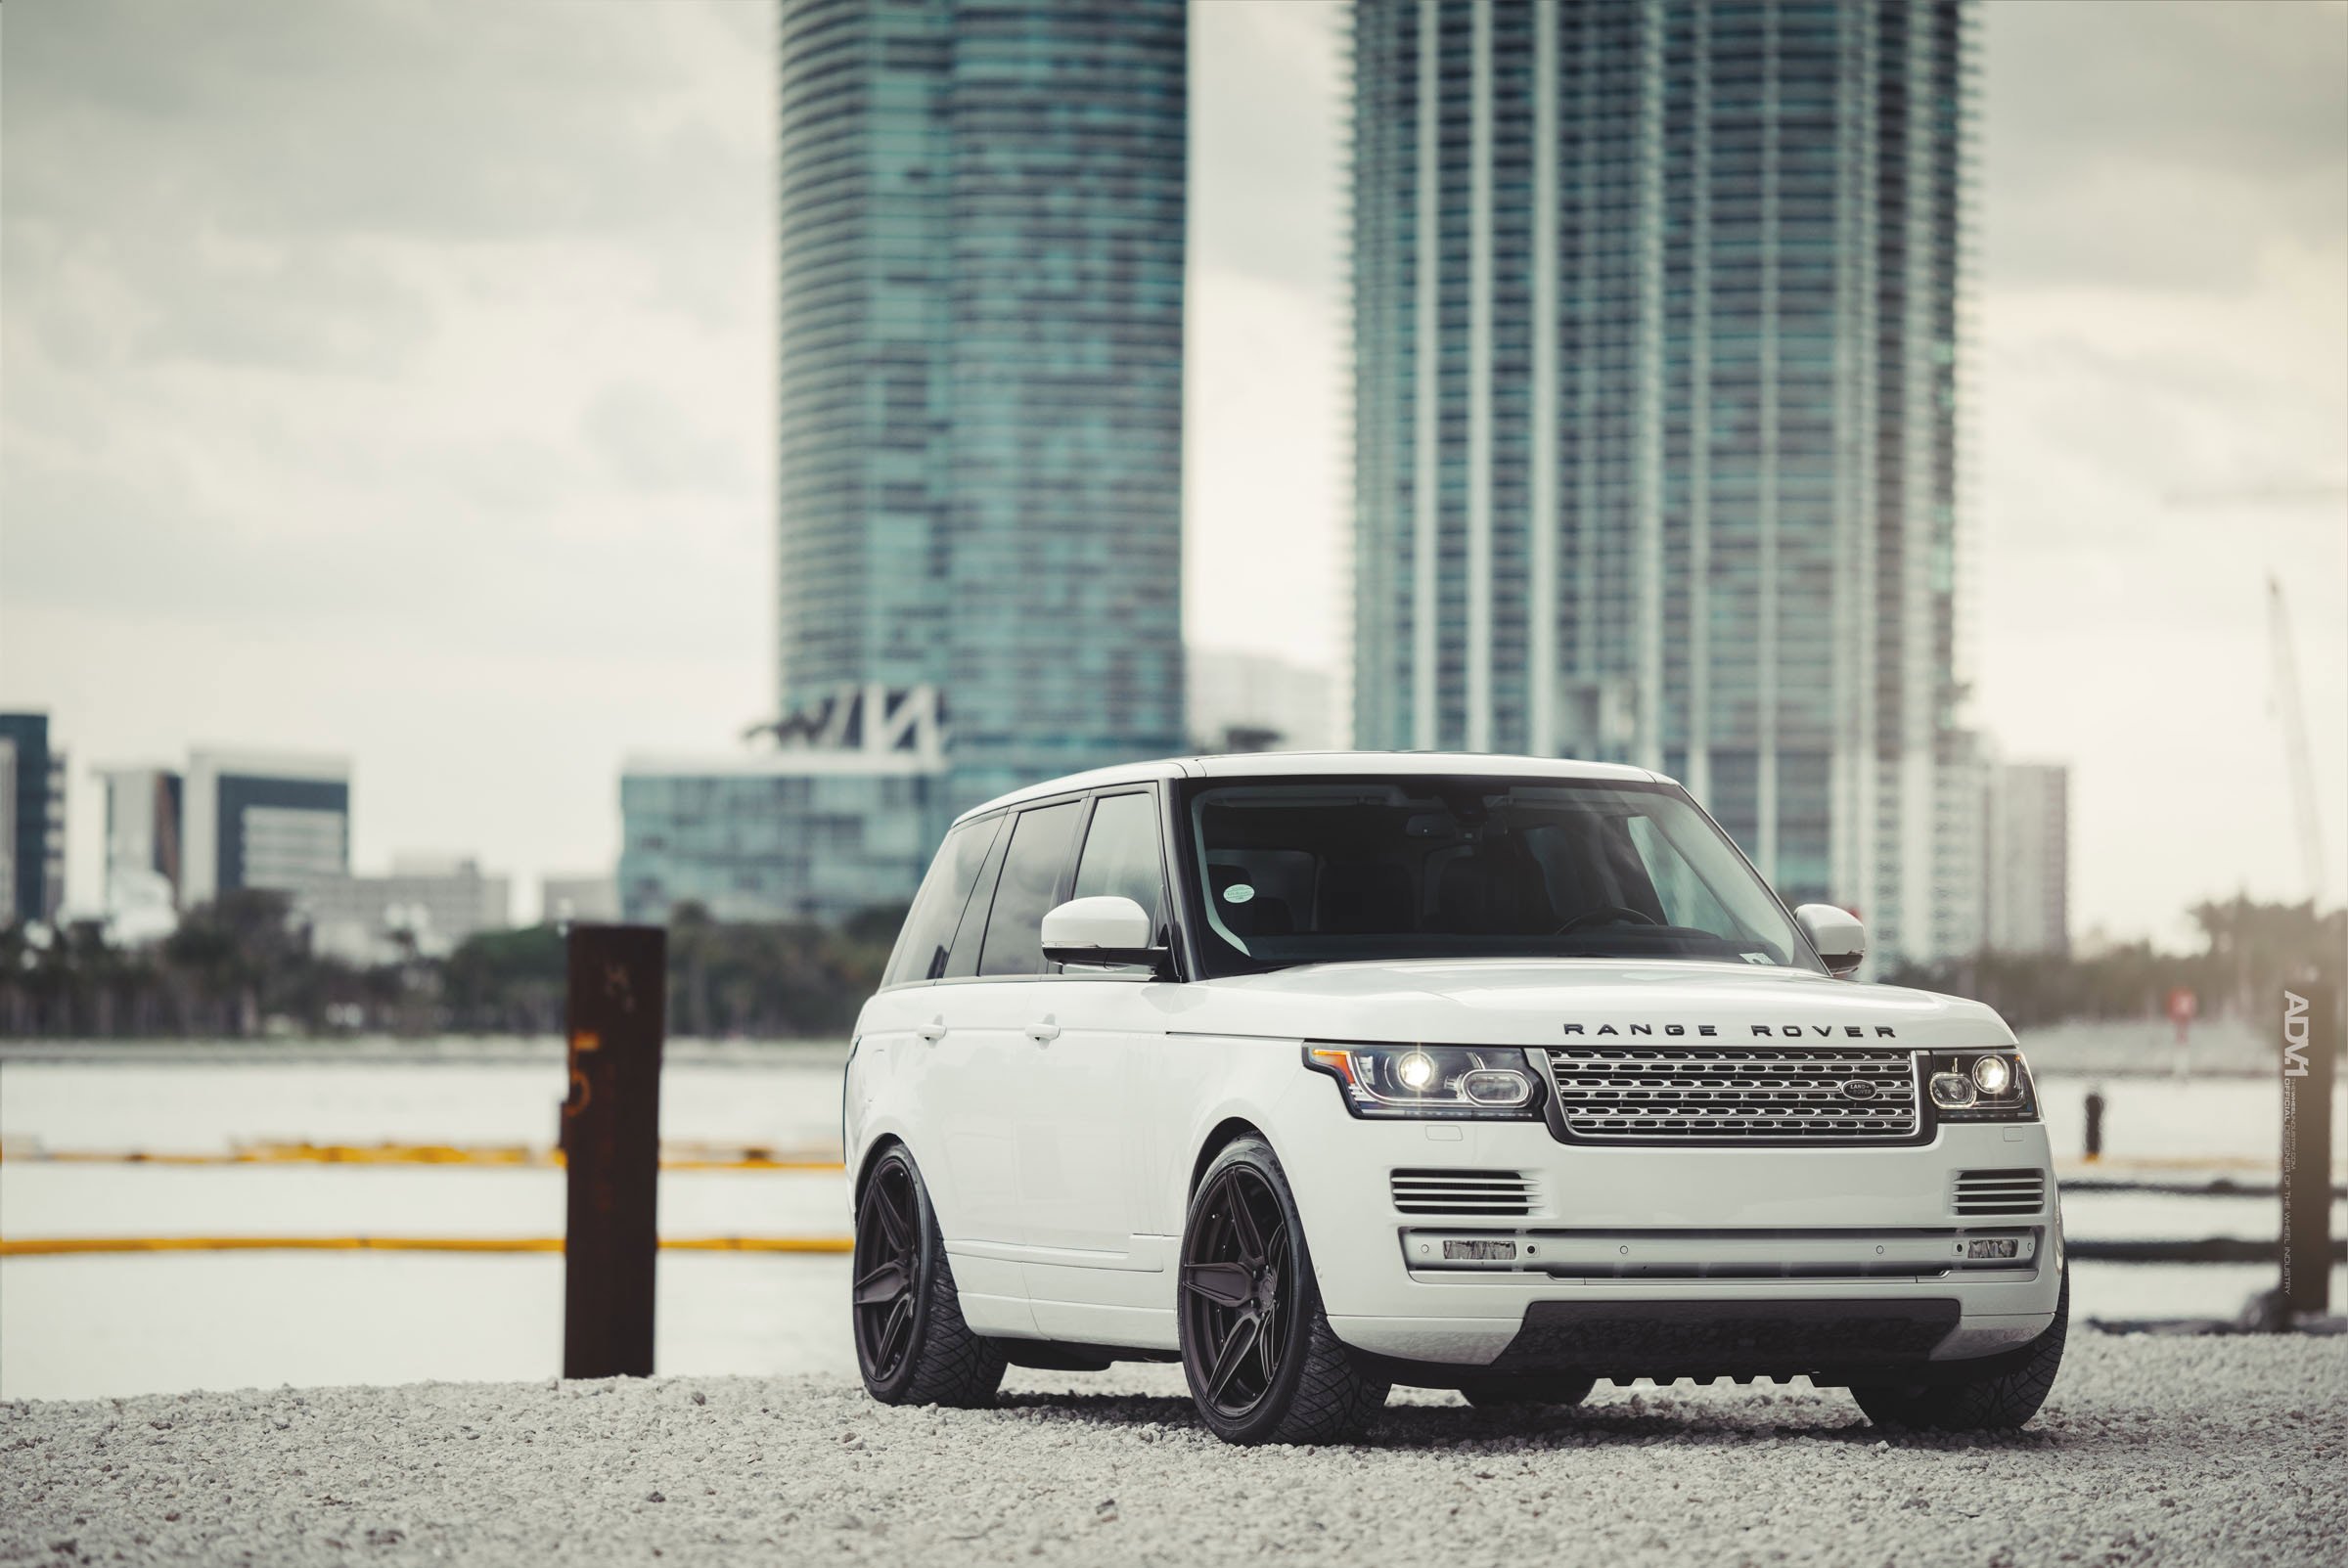 adv, 1, Wheels, Range, Rover, Hsc, Supercharged, Suv, Tuning, Cars Wallpaper